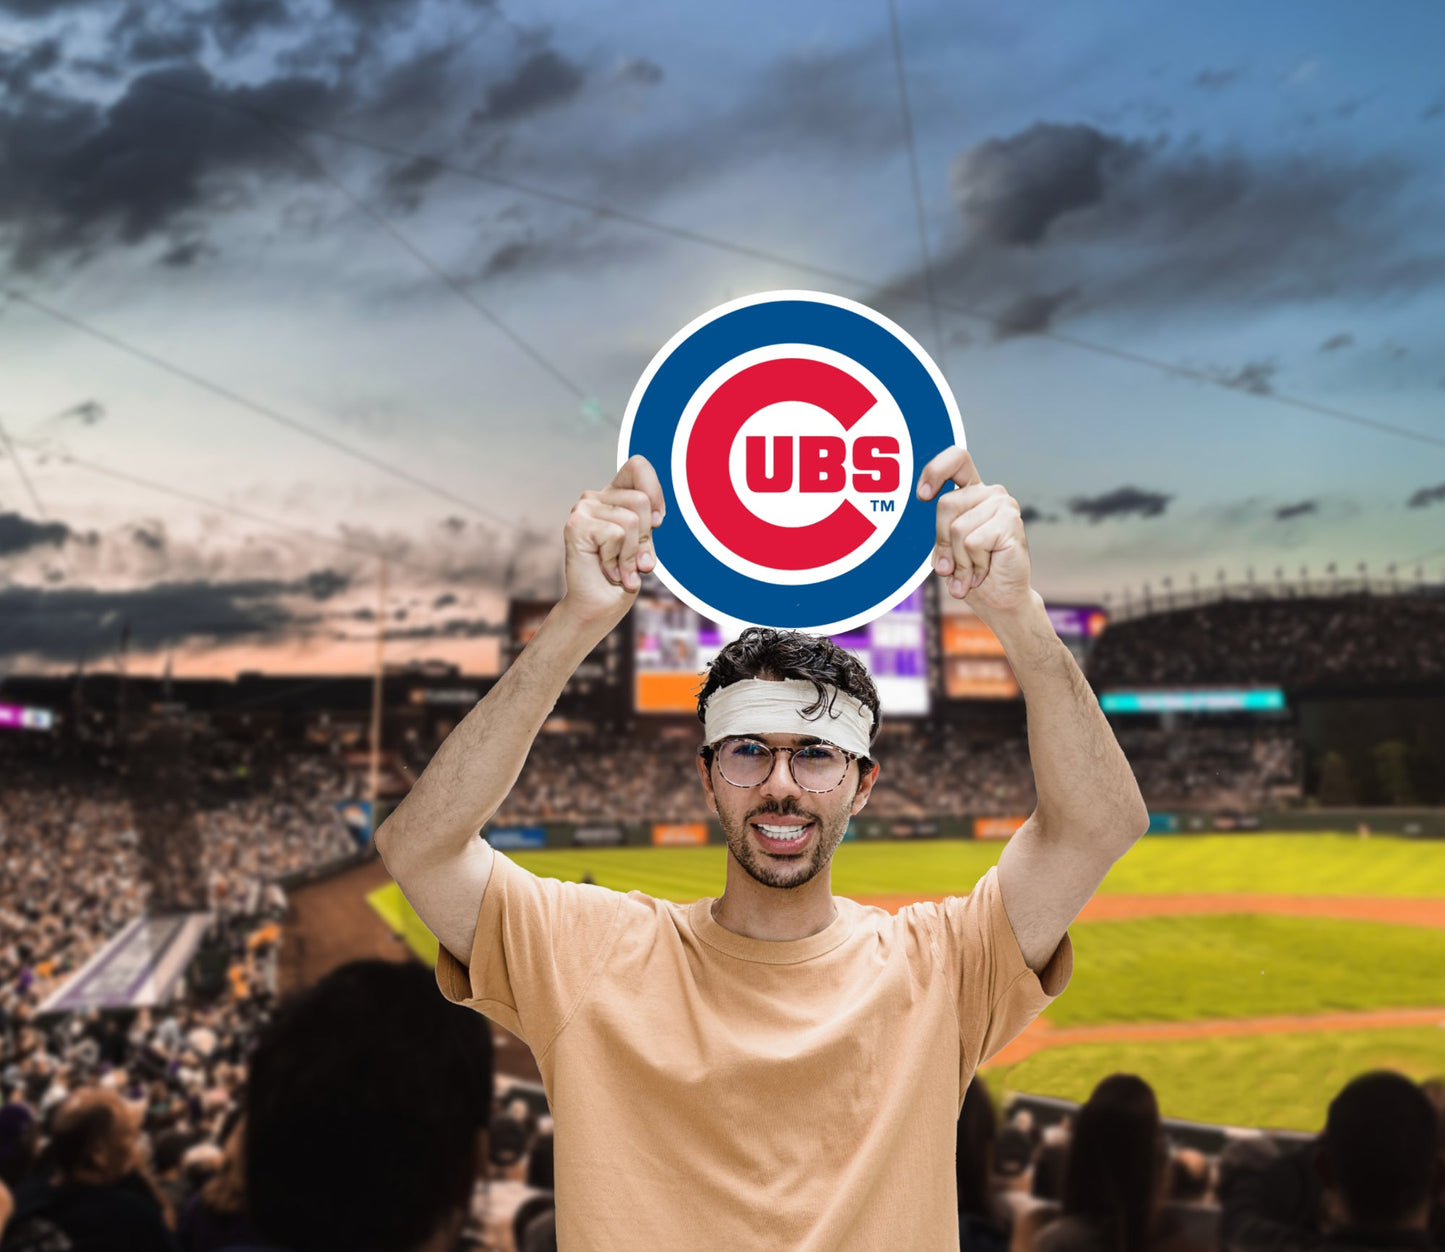 Chicago Cubs: Logo Foam Core Cutout - Officially Licensed MLB Big Head